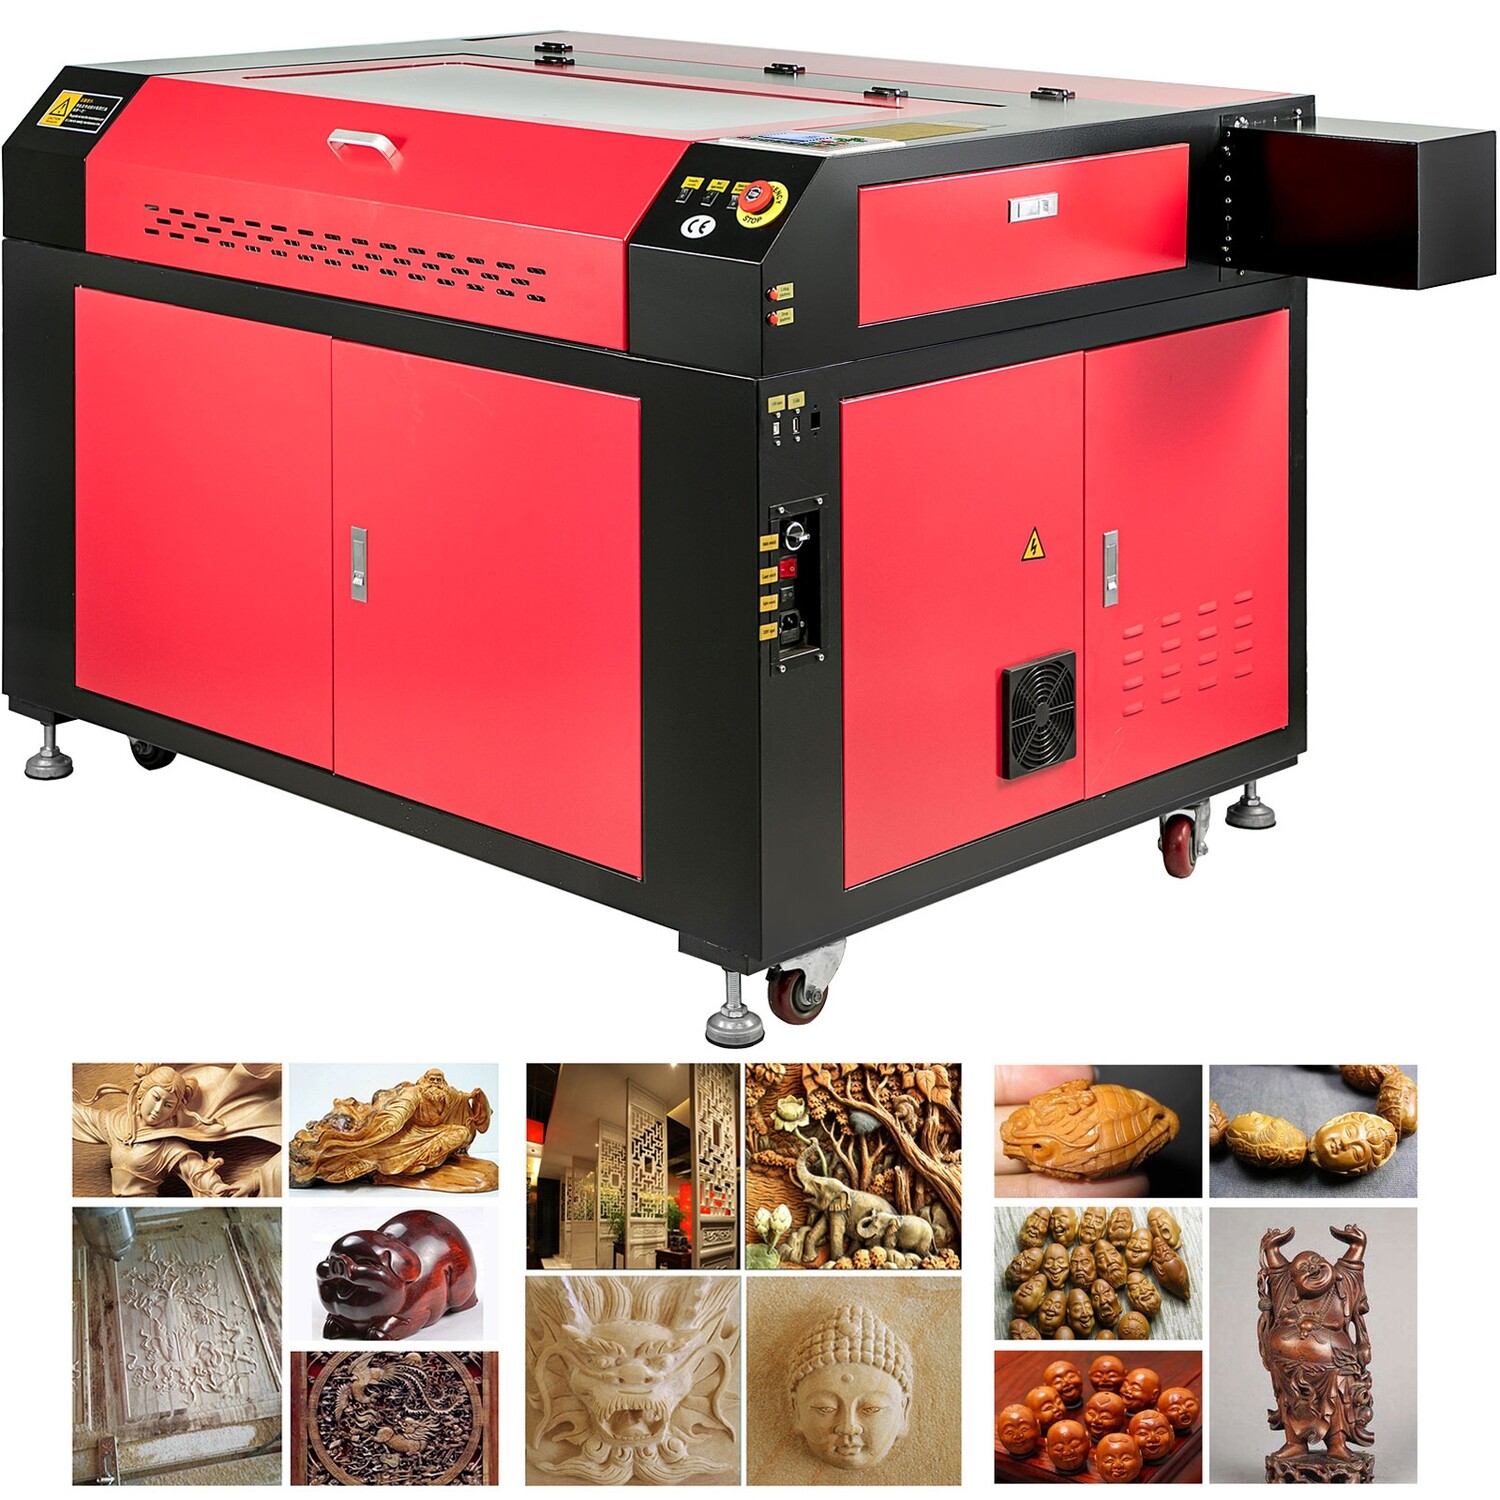 100w Co2 Laser Engraving Cutting Machine 900x600mm USB Engraver Cutter Upgraded